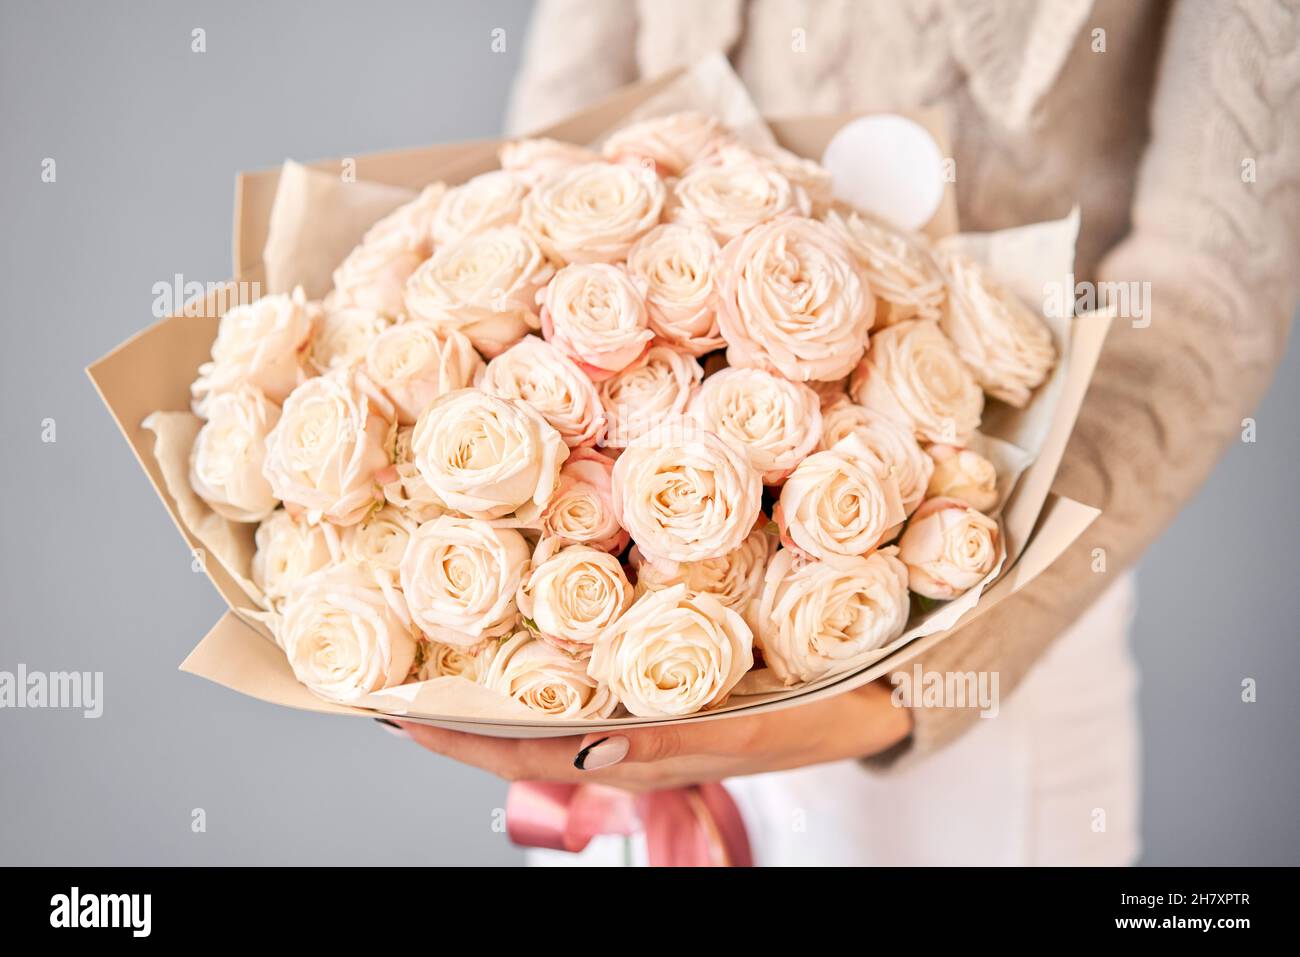 Floral carpet, flower texture, shop concept. Beautiful fresh blossoming flowers roses, spray roses. Blossom in vases and pails. Top view Stock Photo